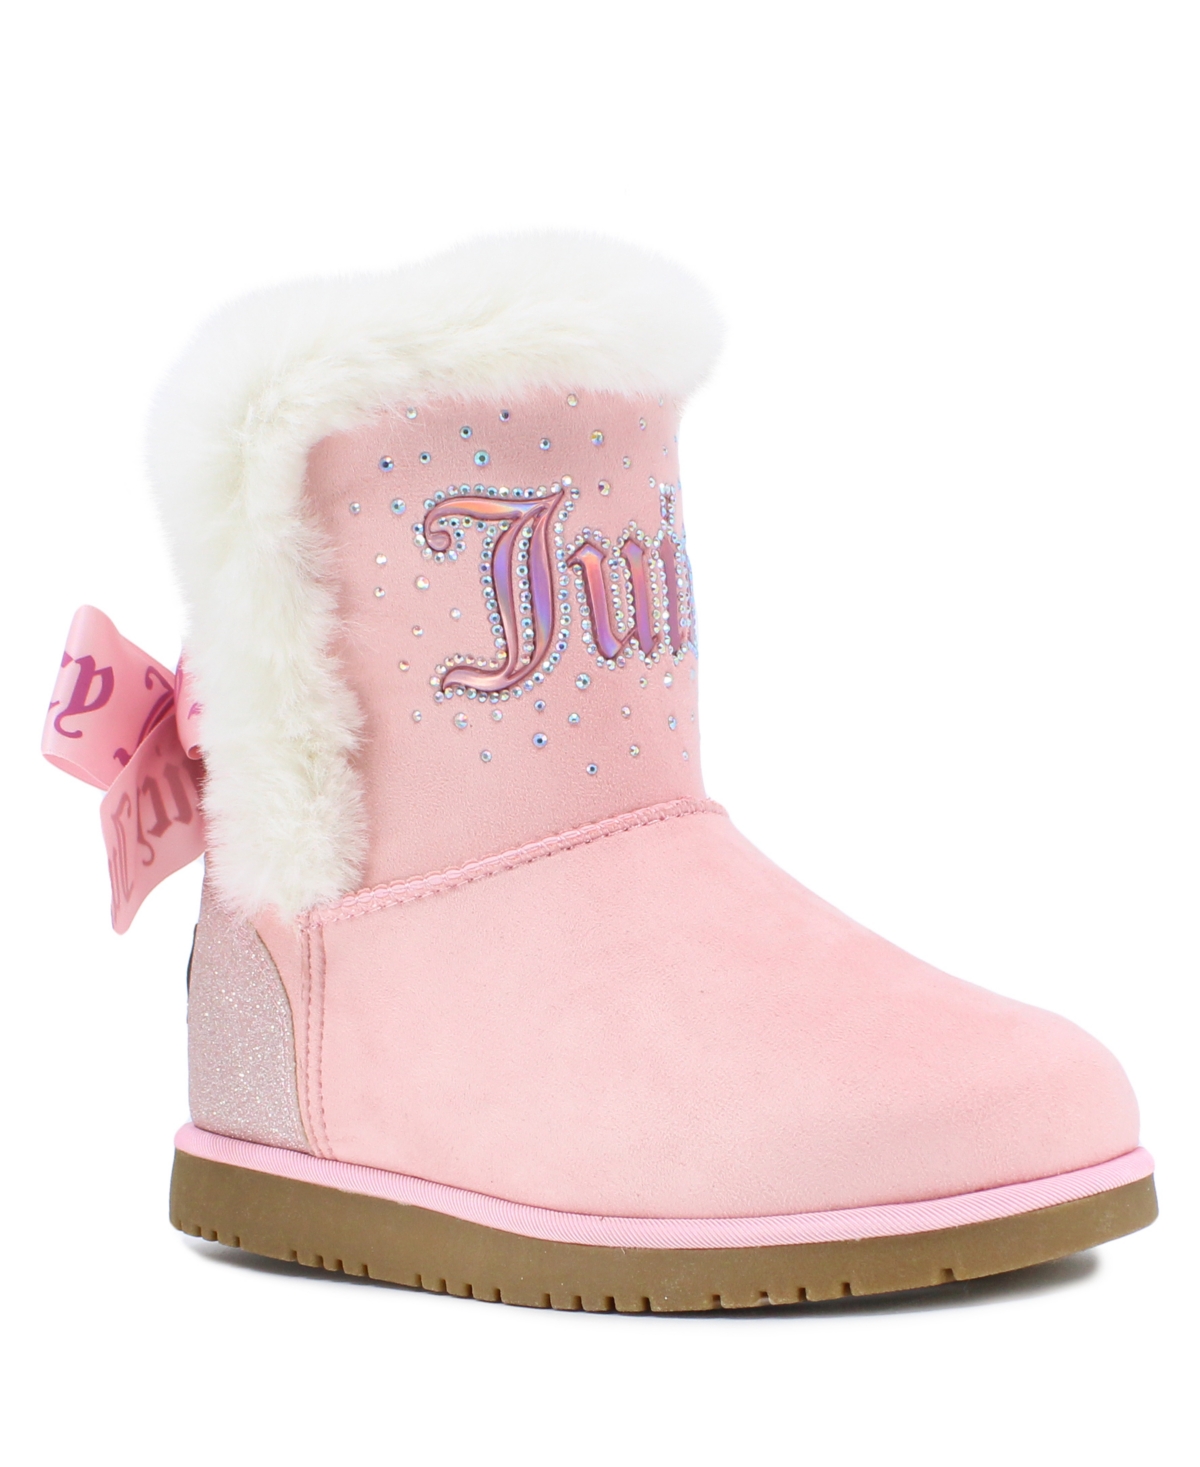 JUICY COUTURE BIG GIRLS COZY FAUX FUR RHINESTONE BOOTS